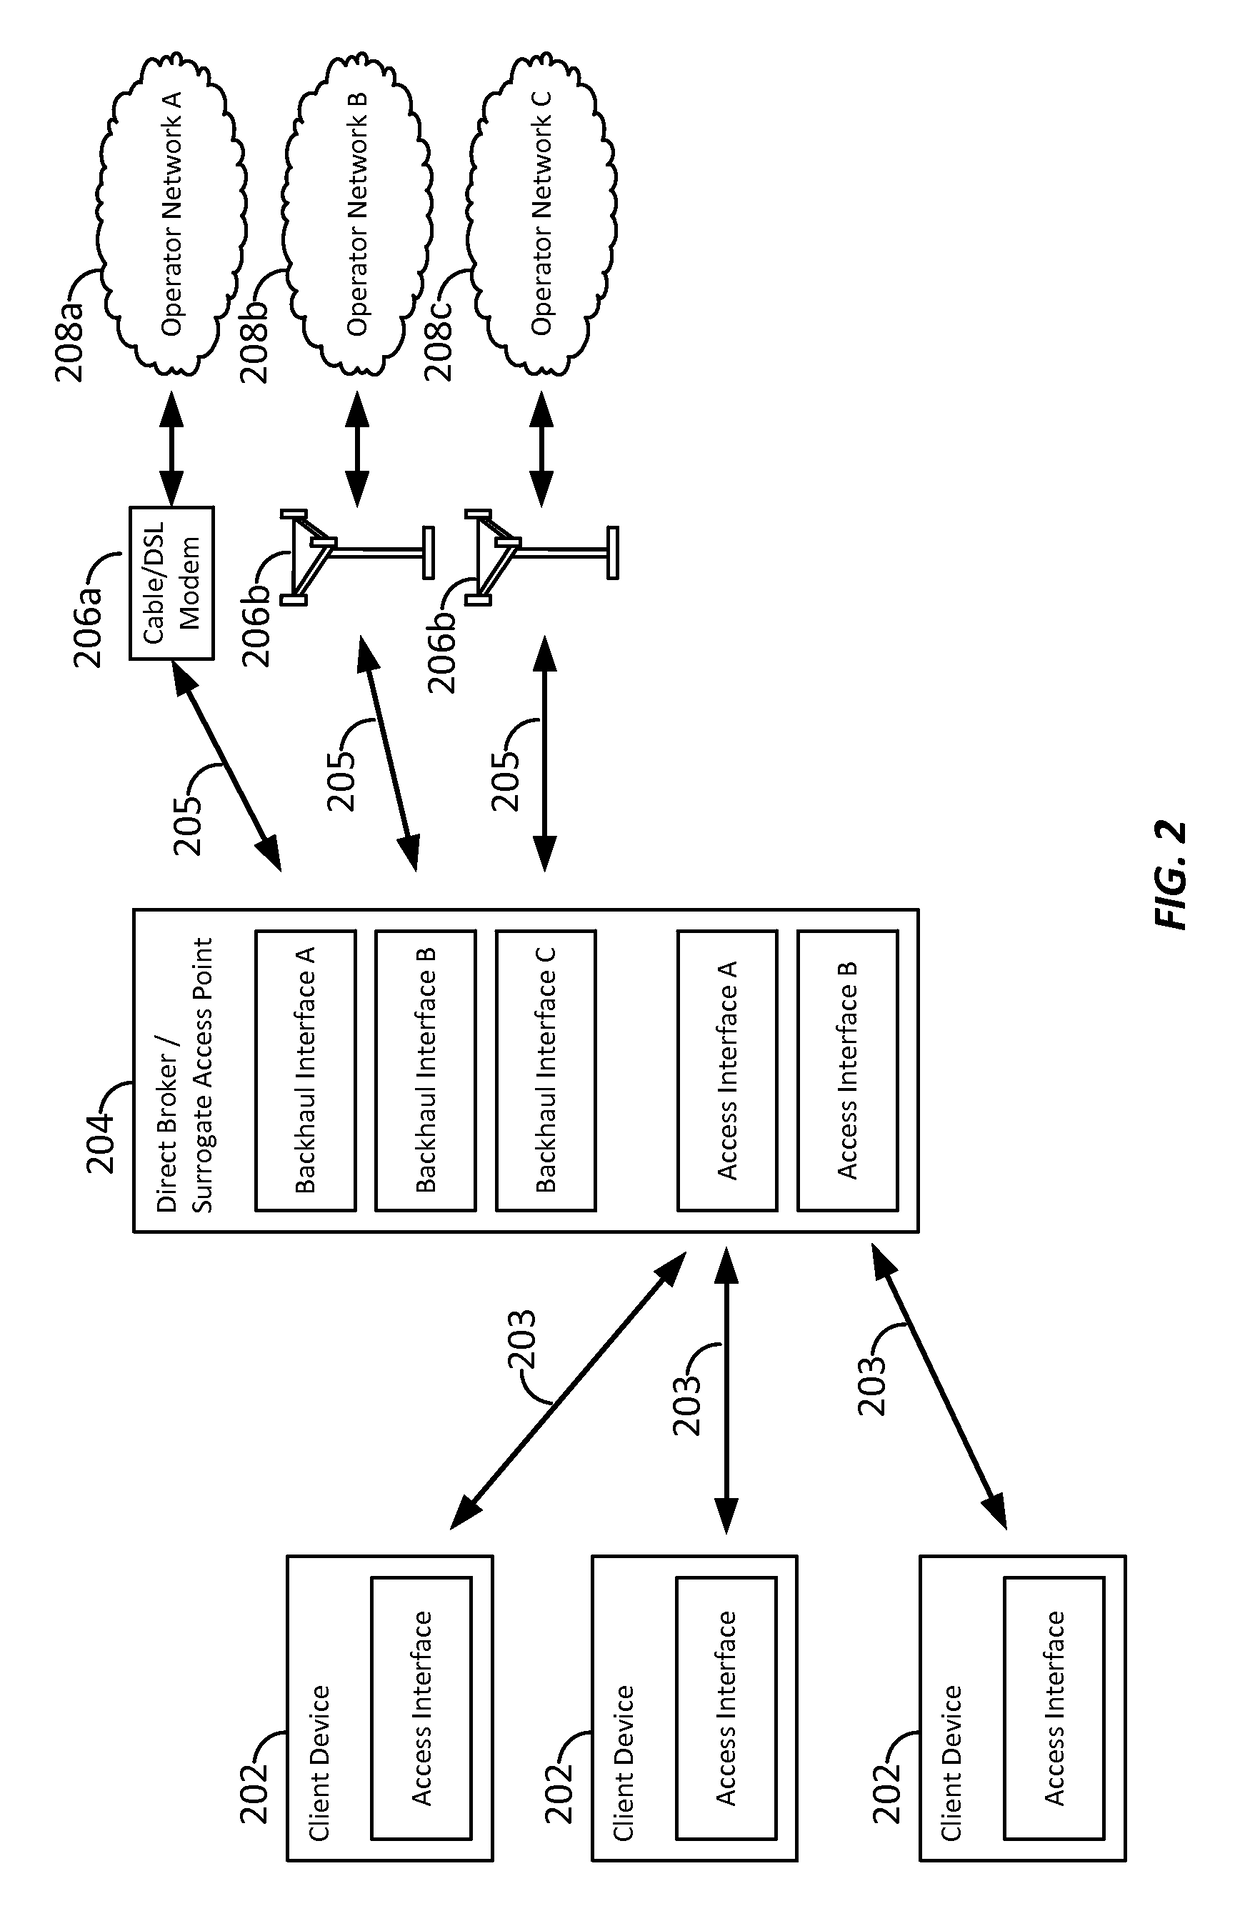 Peer-enabled network access extension using yield management